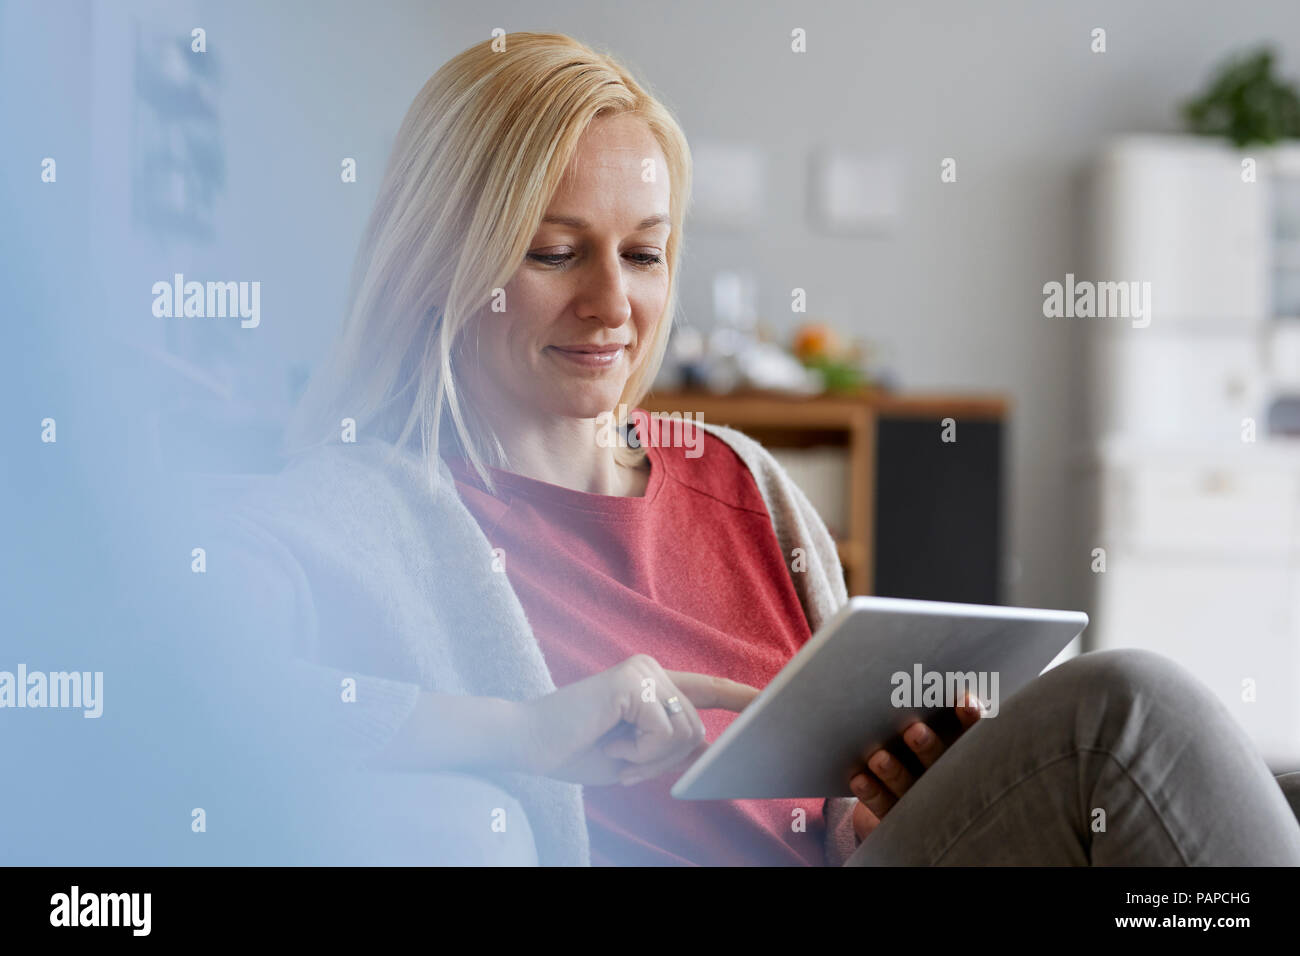 Blonde woman sitting at home, using digital tablet Banque D'Images